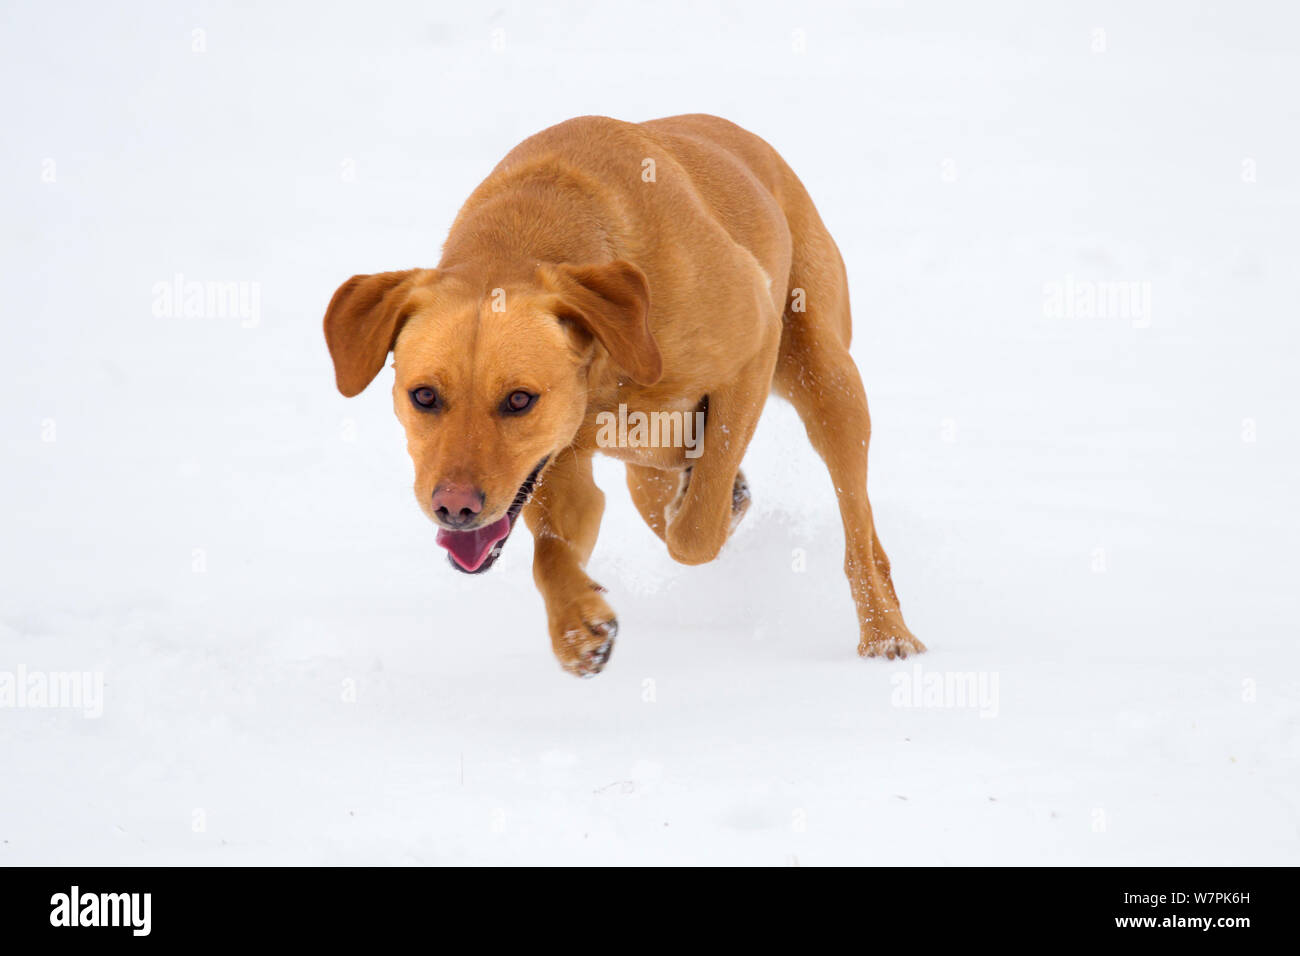 Yellow Labrador playing in snow. Stock Photo